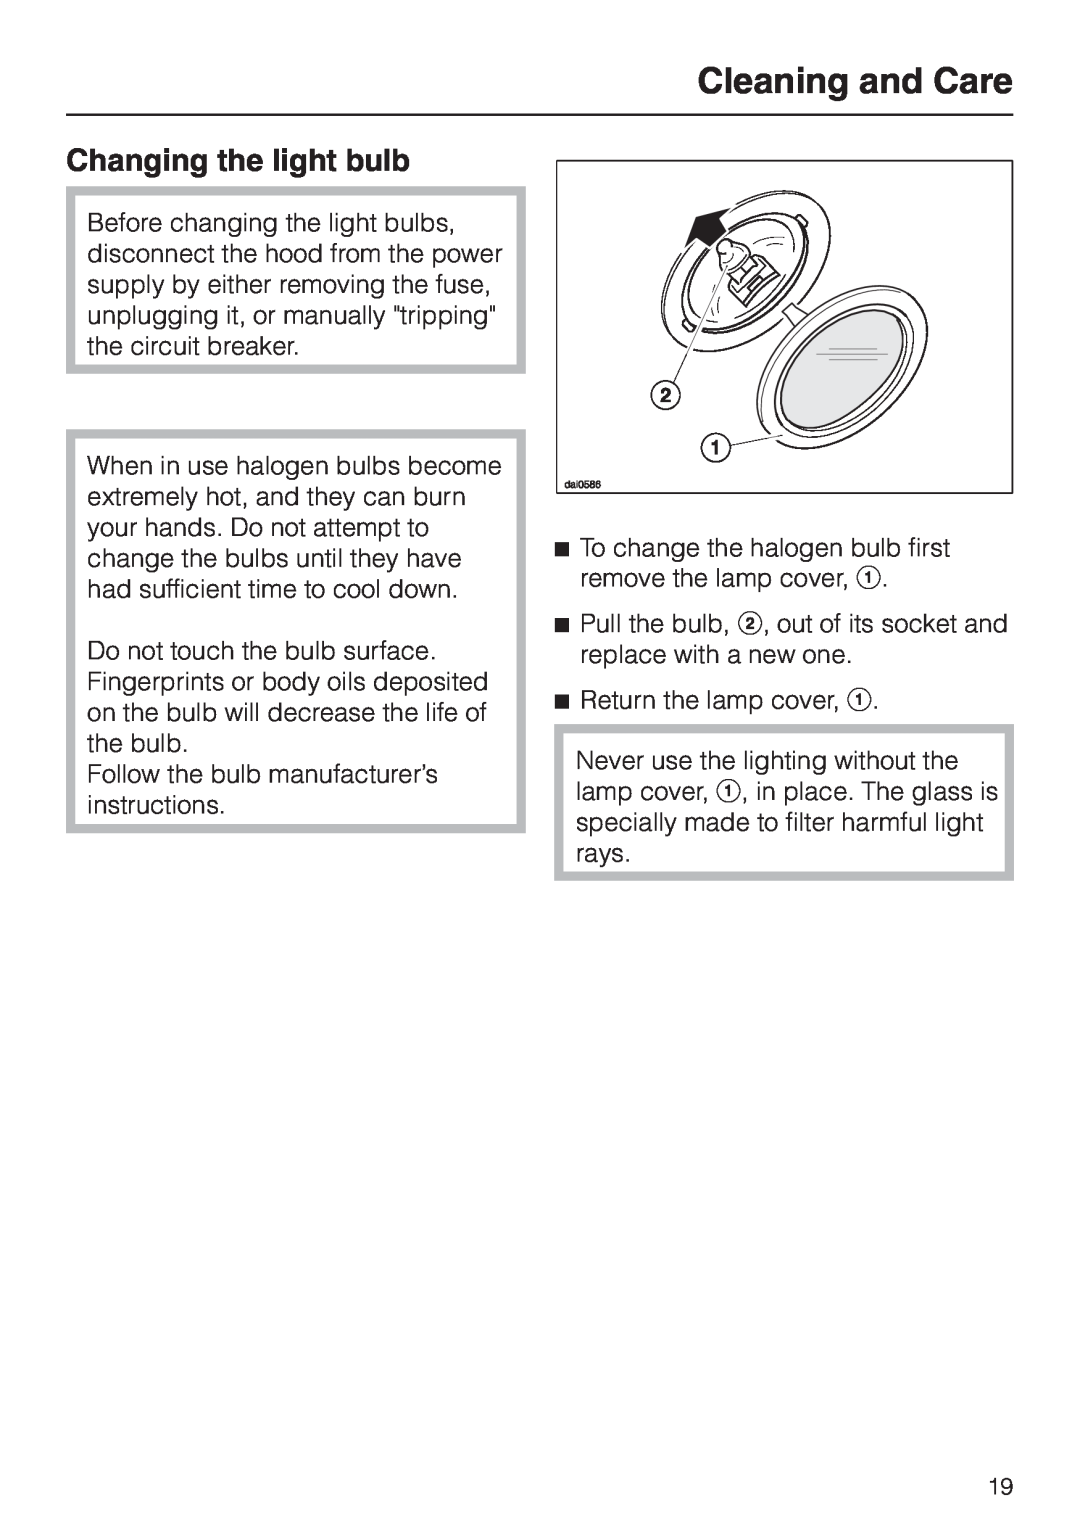 Miele DA 219-3, DA217-3 installation instructions Changing the light bulb, Cleaning and Care 